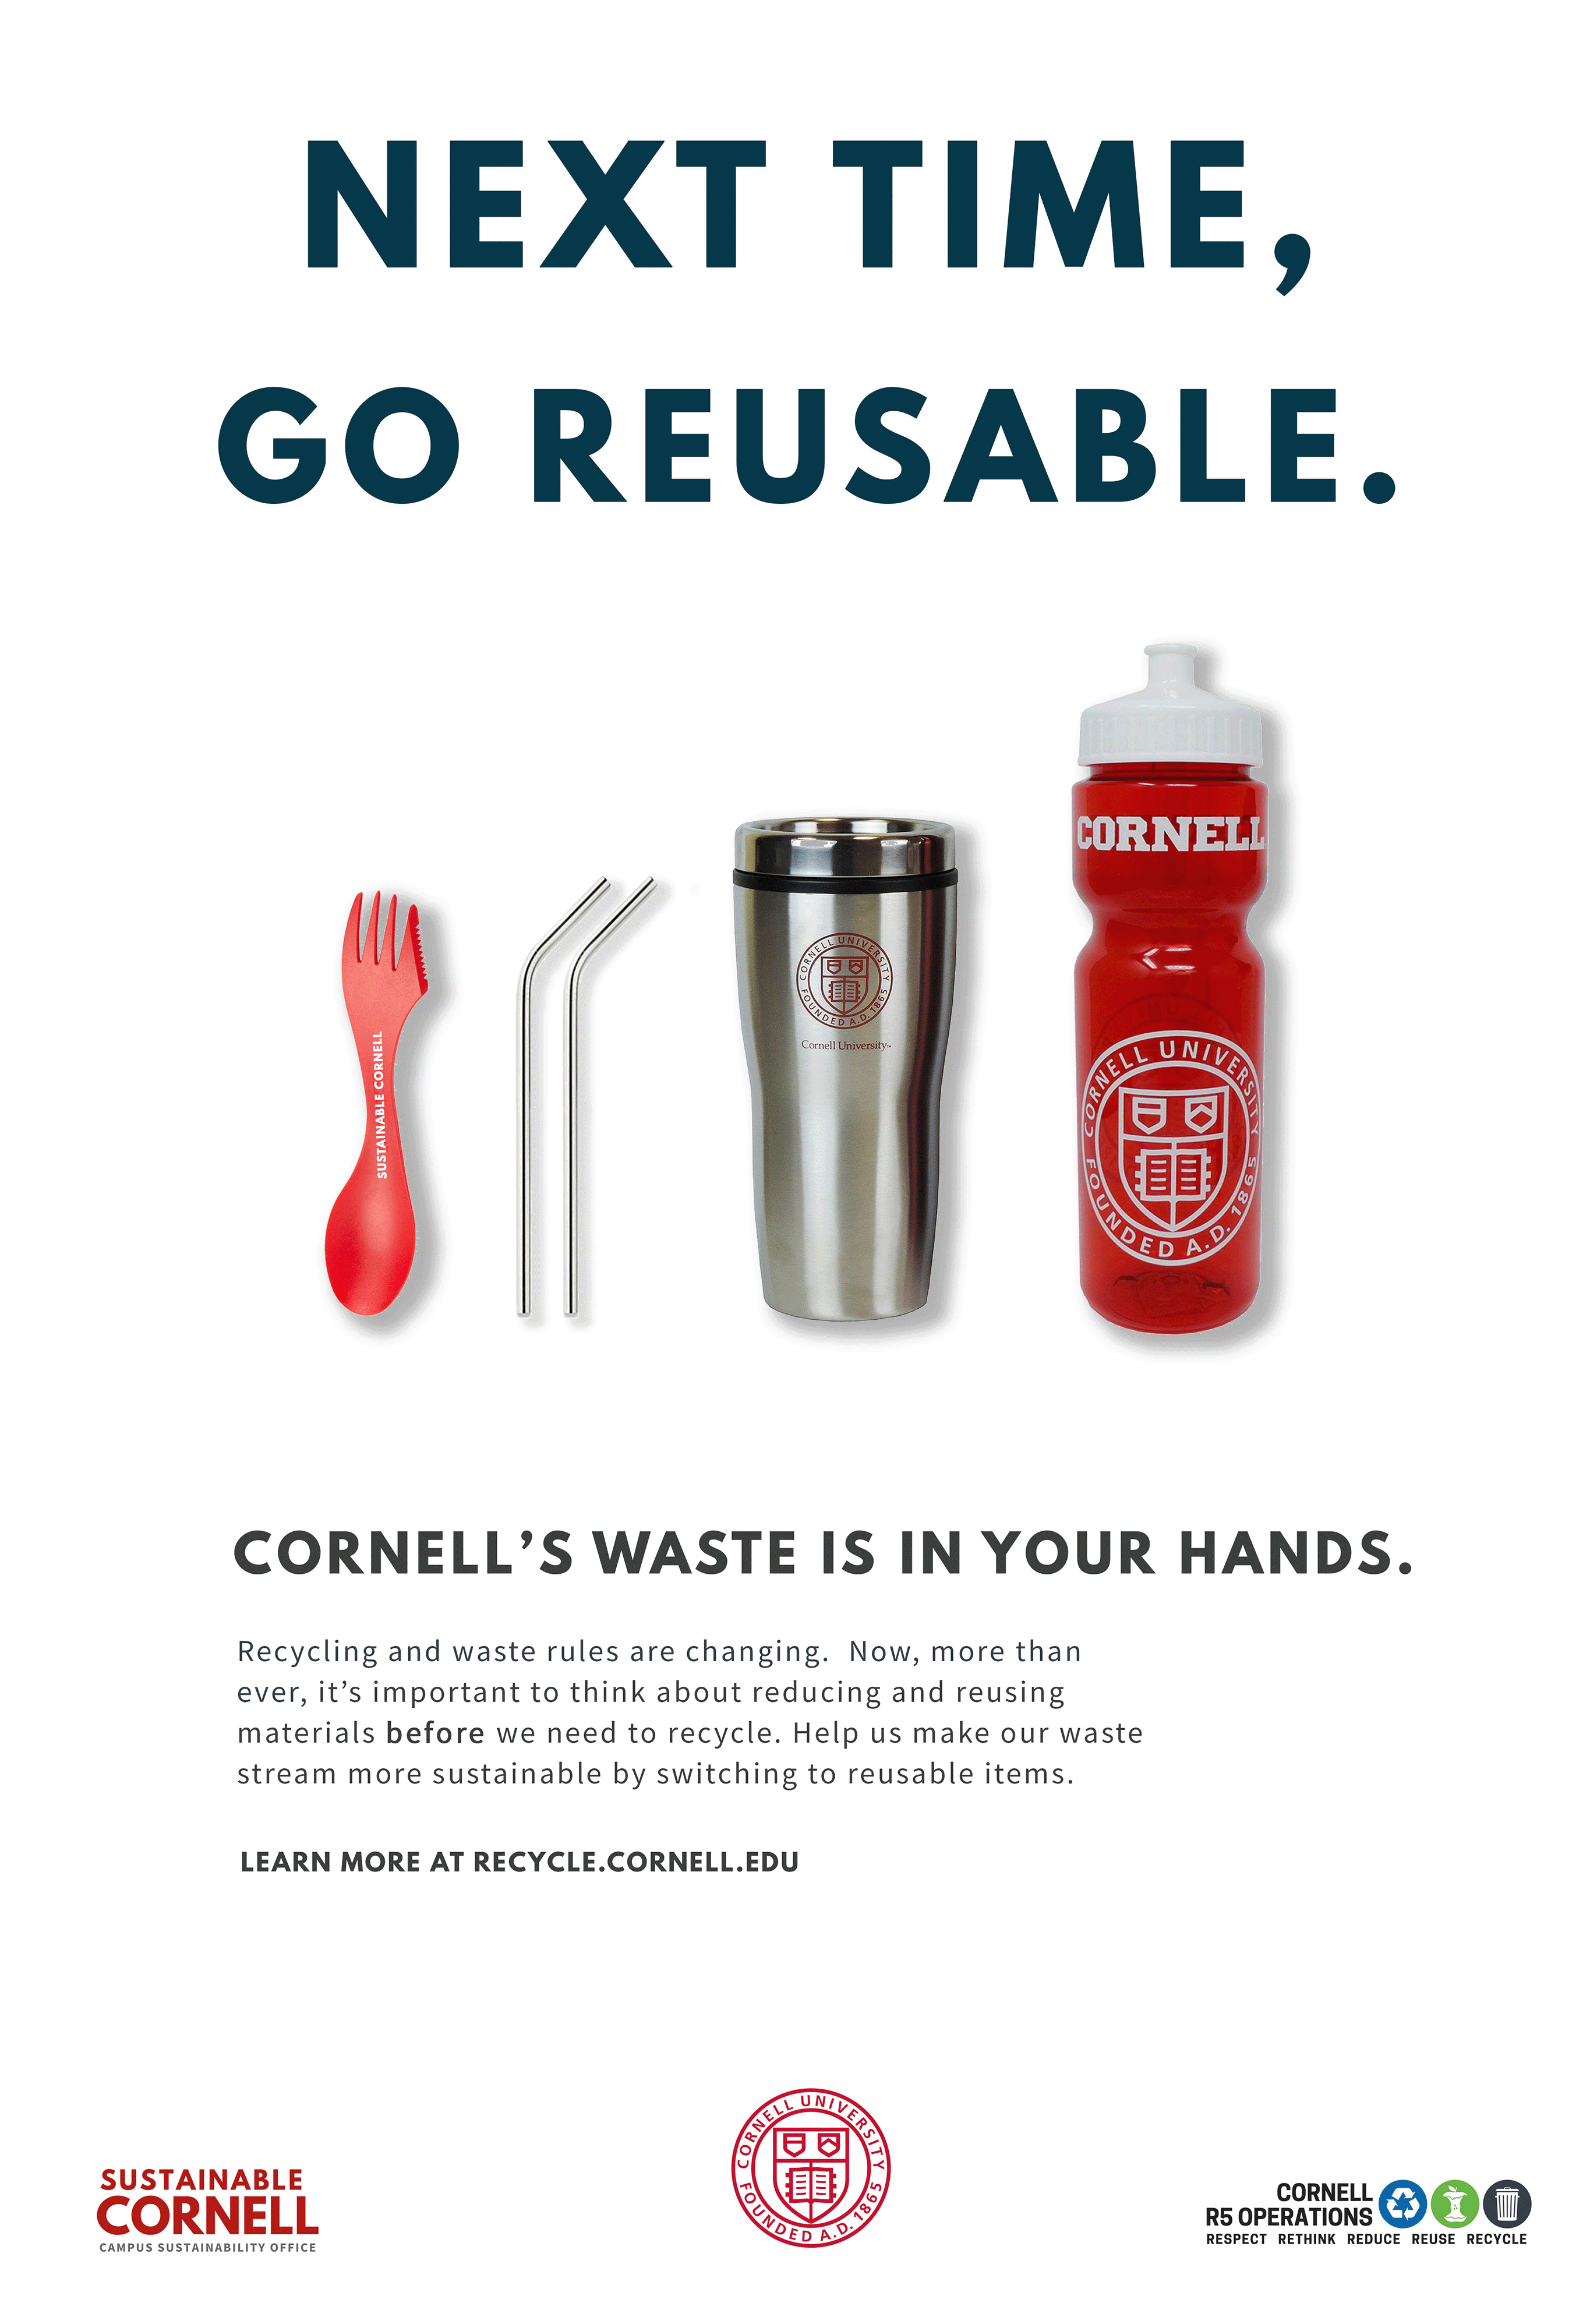 Poster reads "go reusable" with image of reusable spork, metal straw, and coffee mug. Text below reads "Cornell's waste is in your hands."